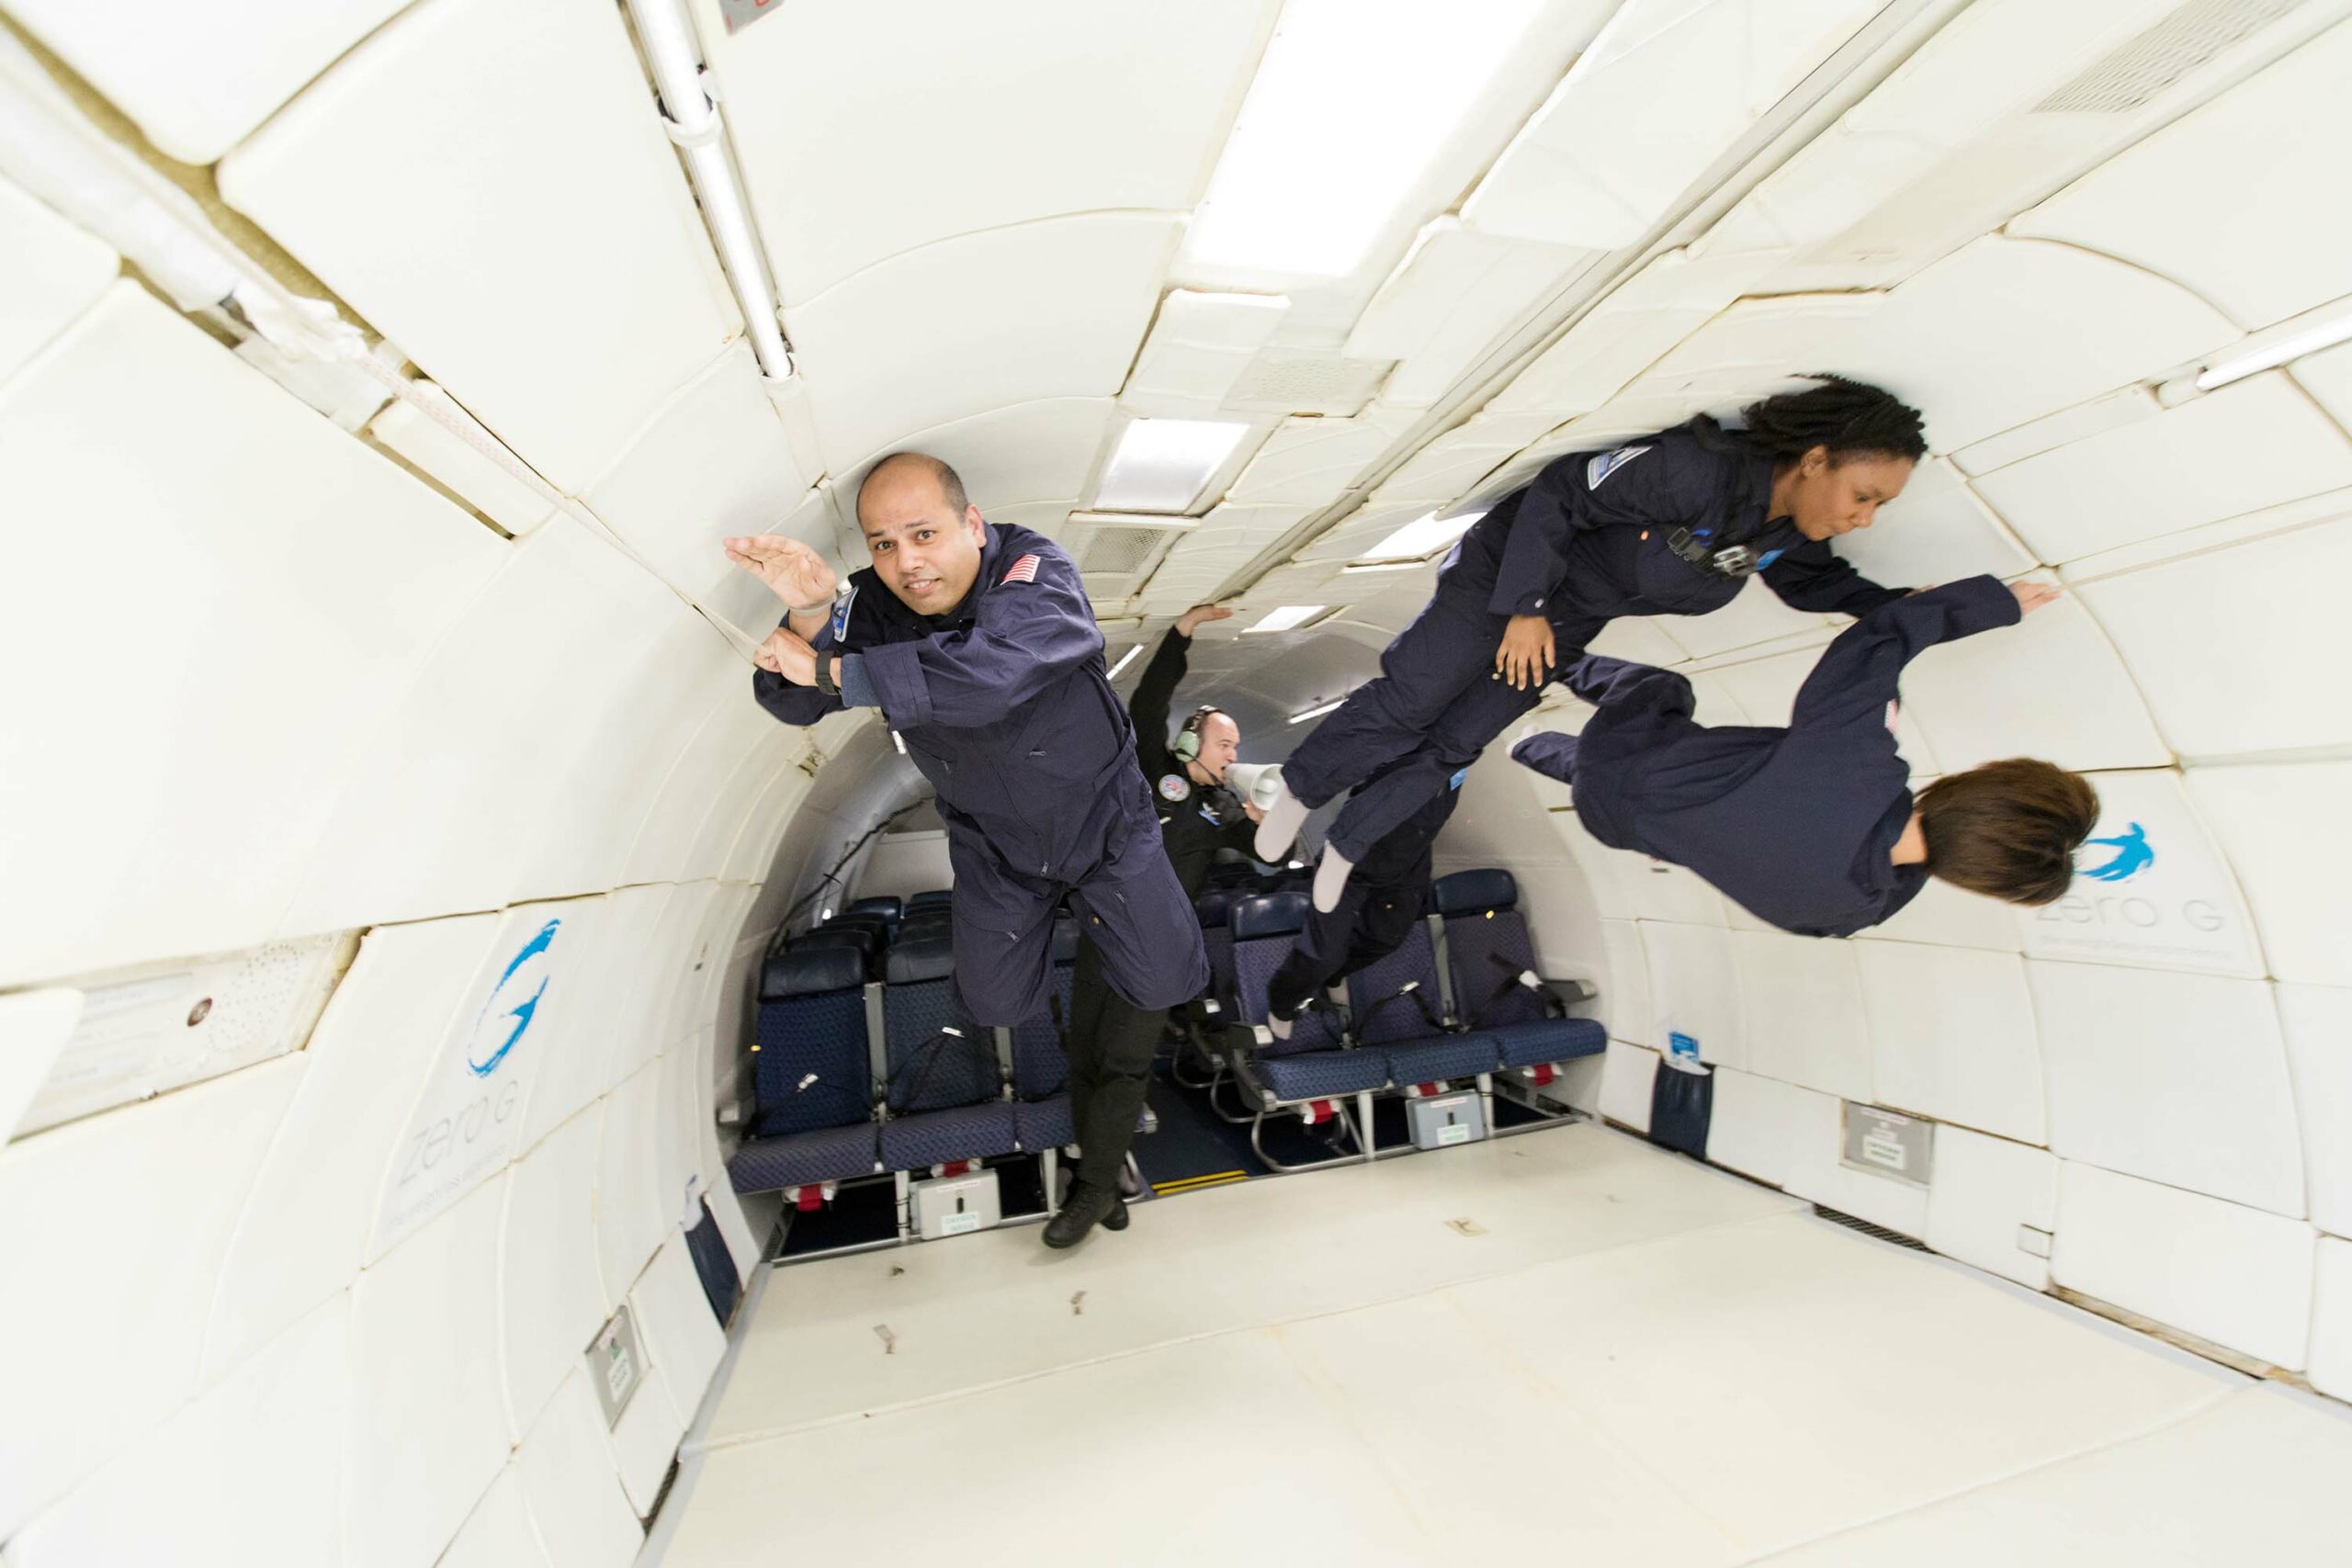 I floated in zero-g with former astronaut Scott Kelly